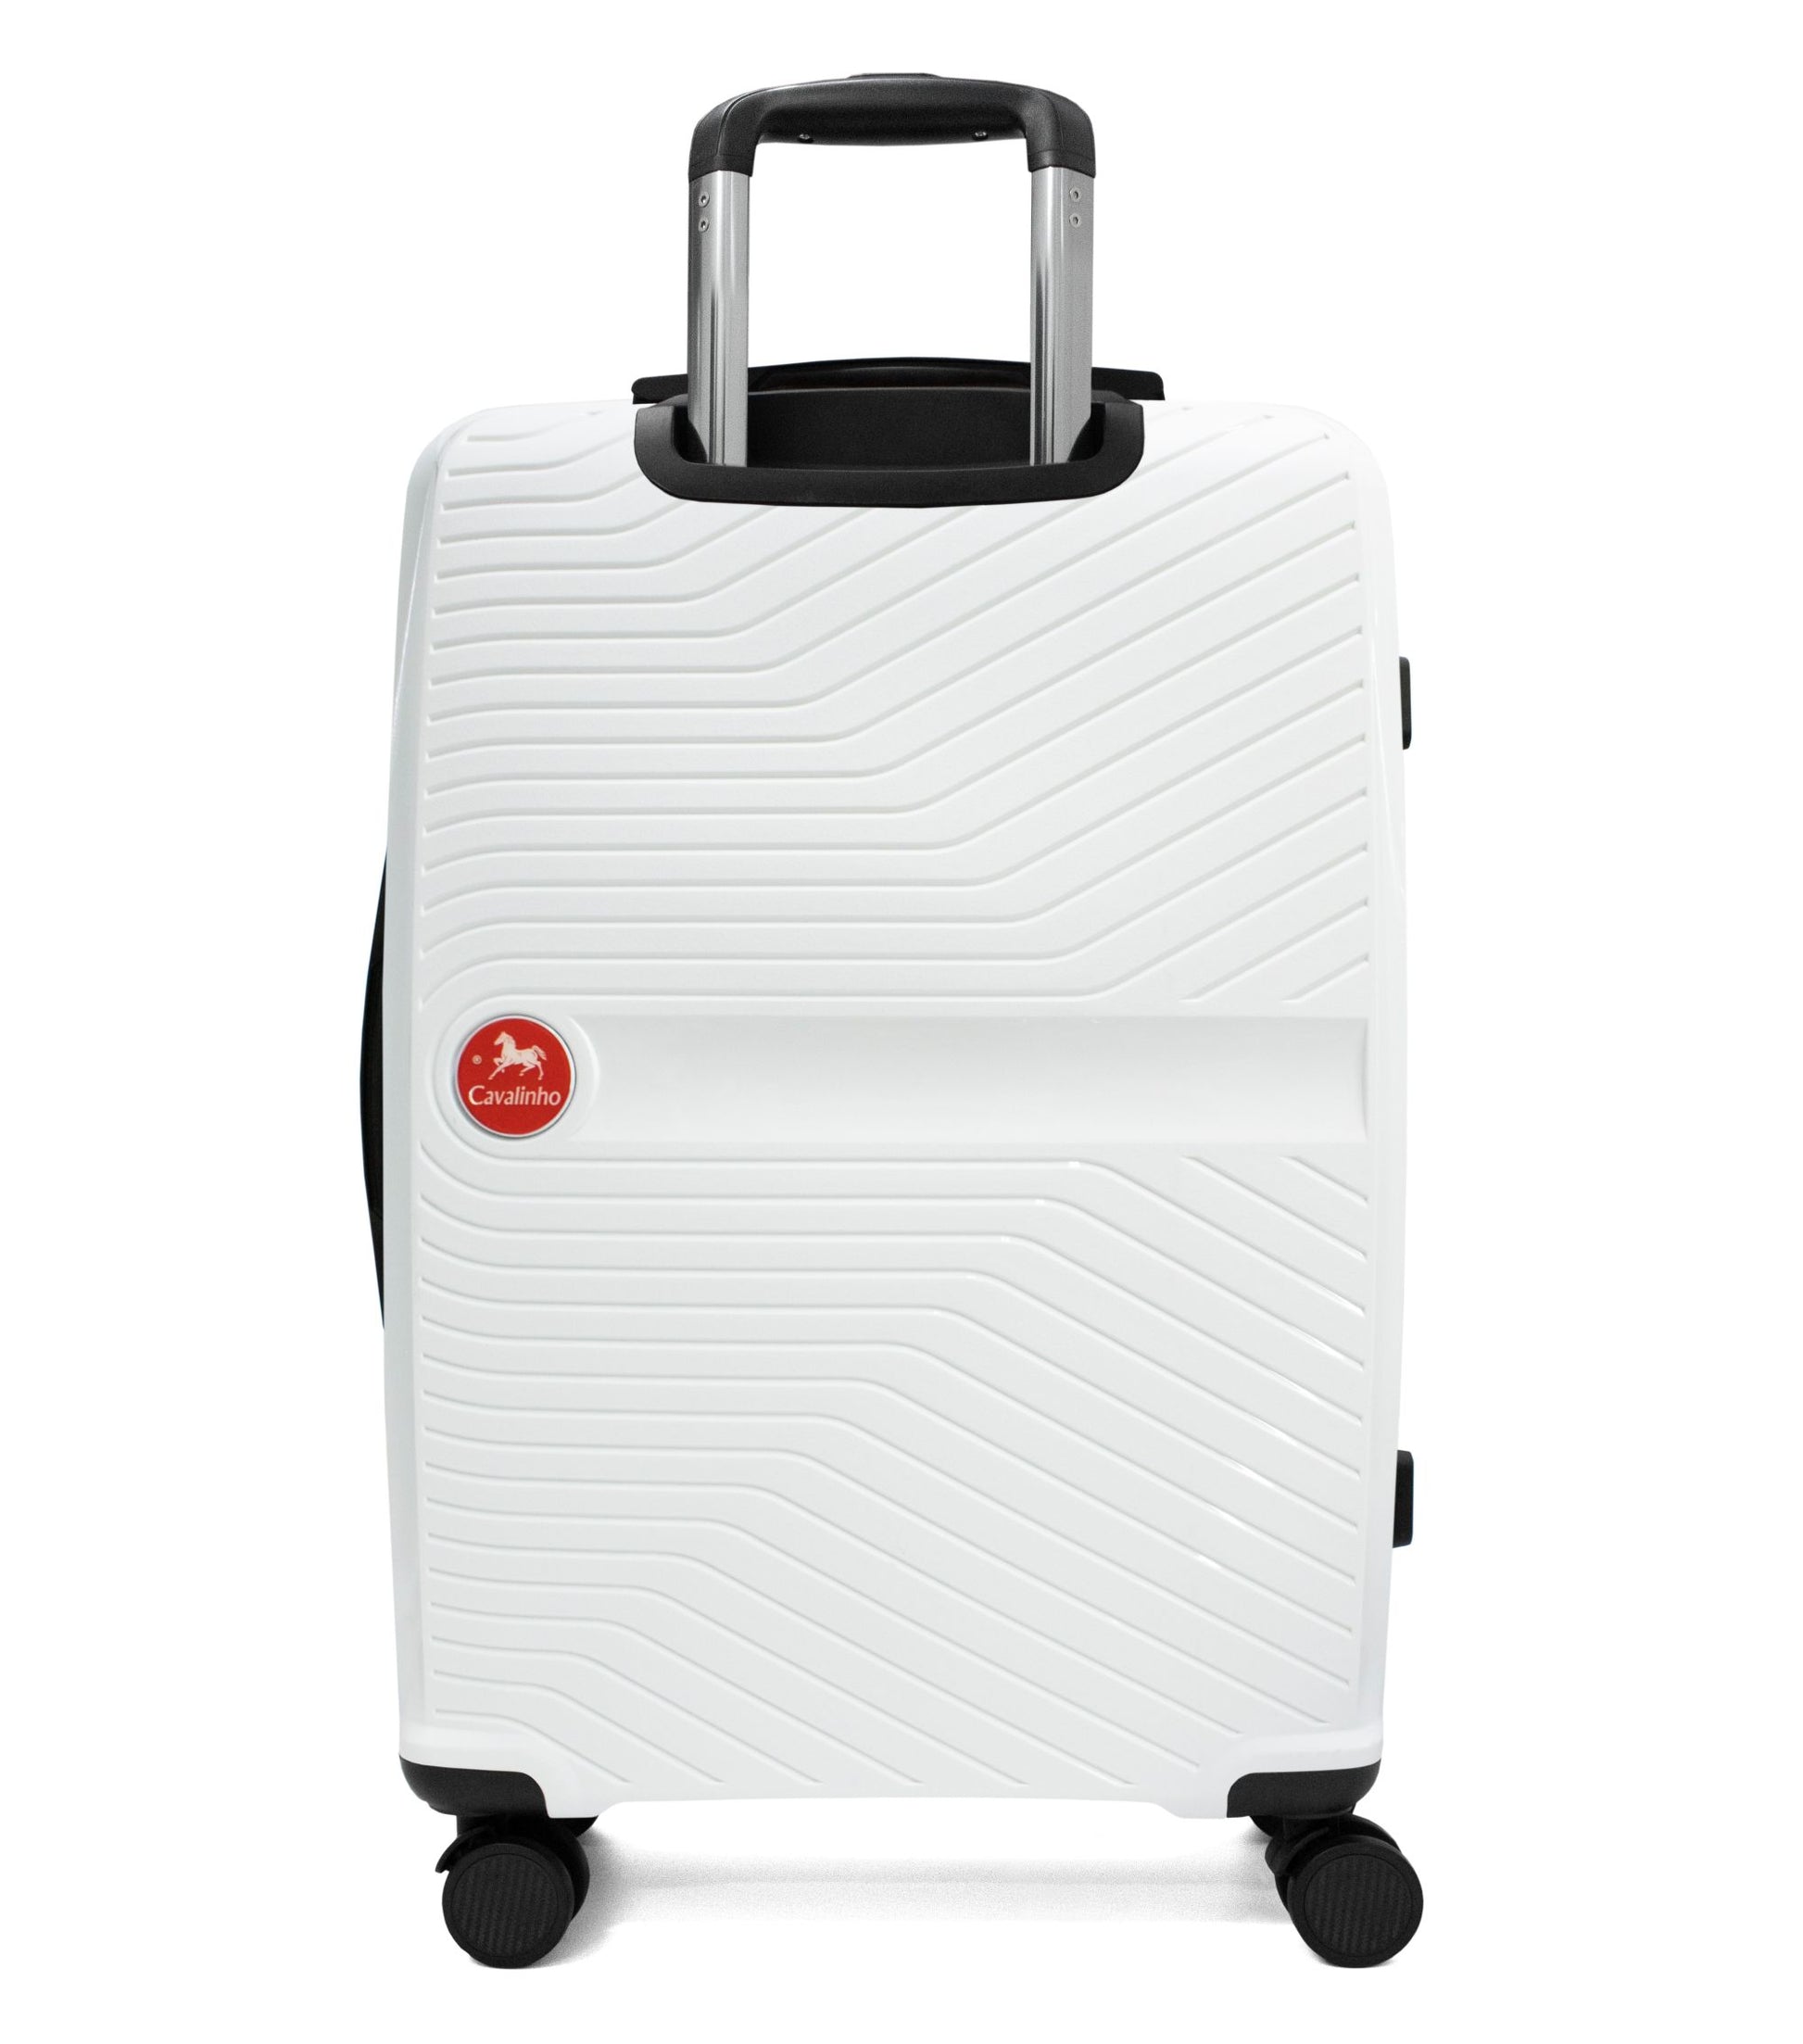 #color_ 24 inch White | Cavalinho Colorful Check-in Hardside Luggage (24") - 24 inch White - 68020004.06.24_3